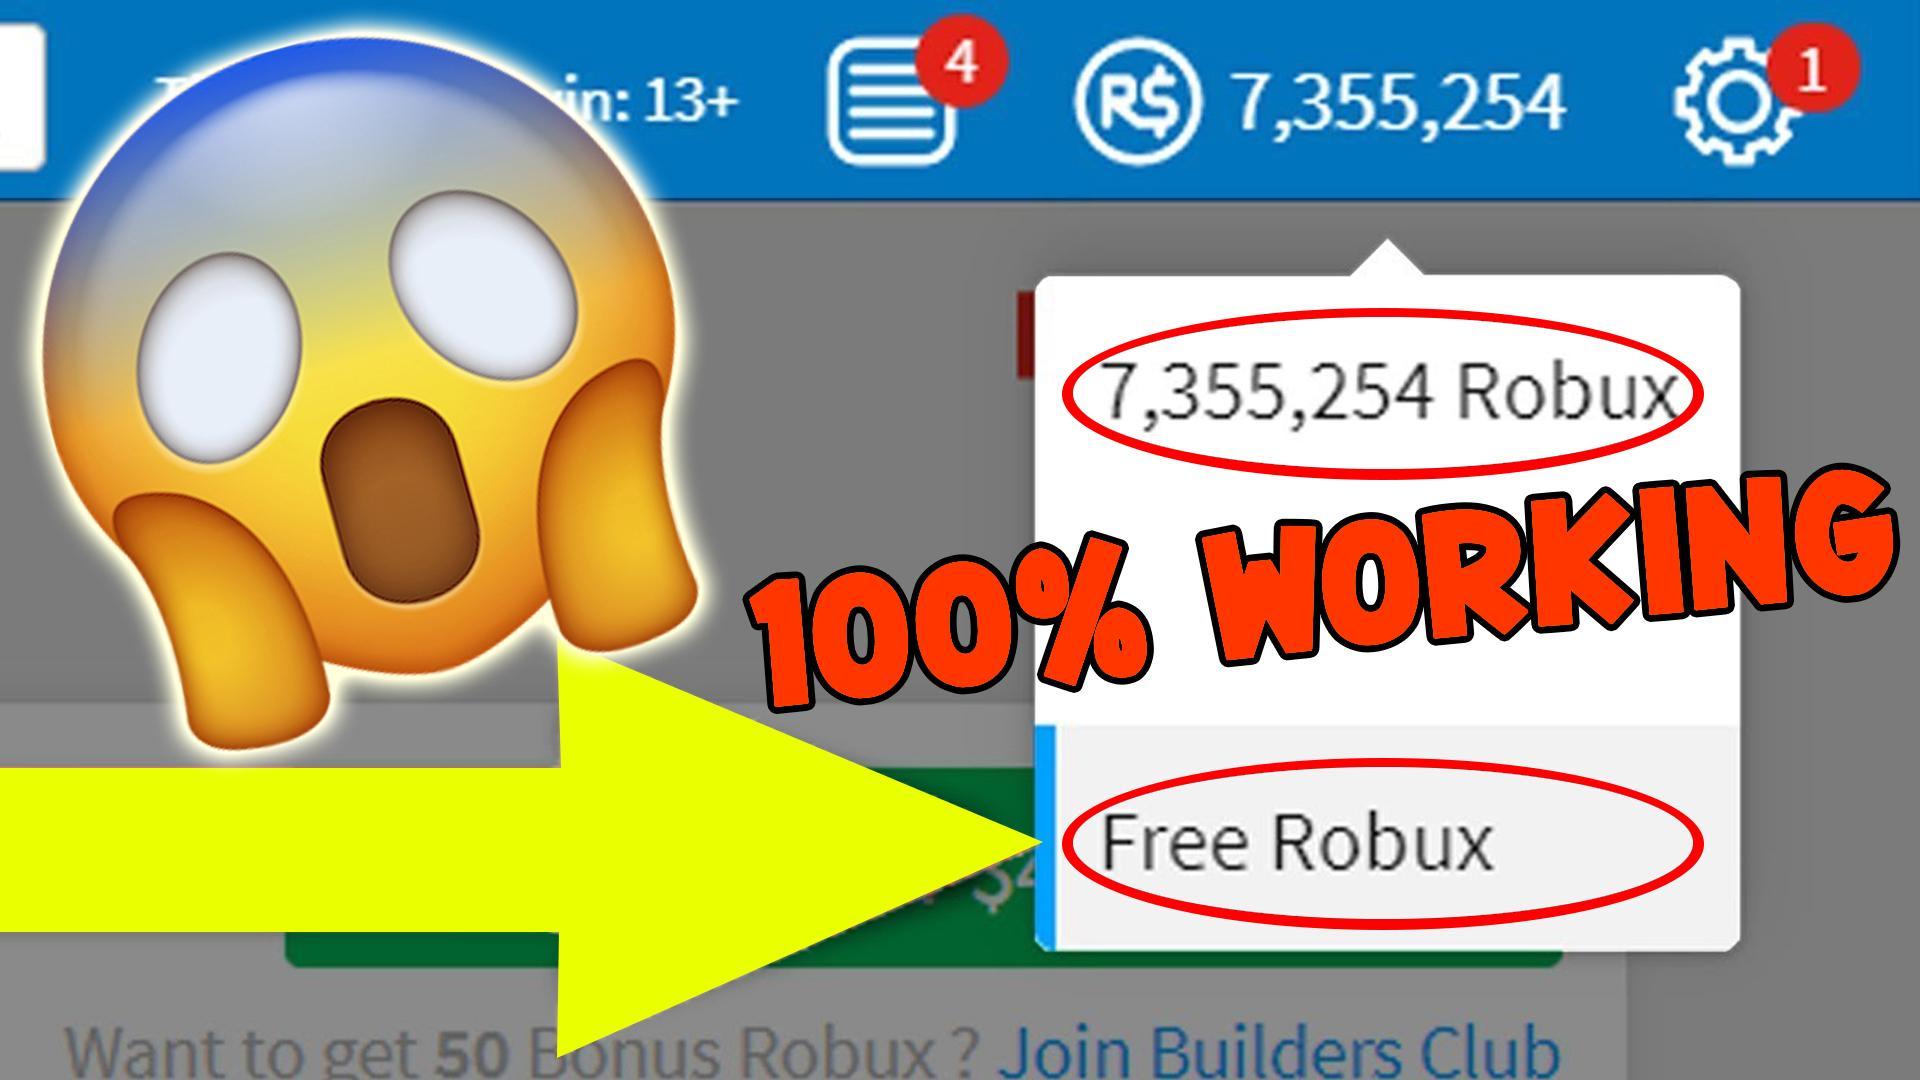 How To Get Free Robux On Roblox Legit